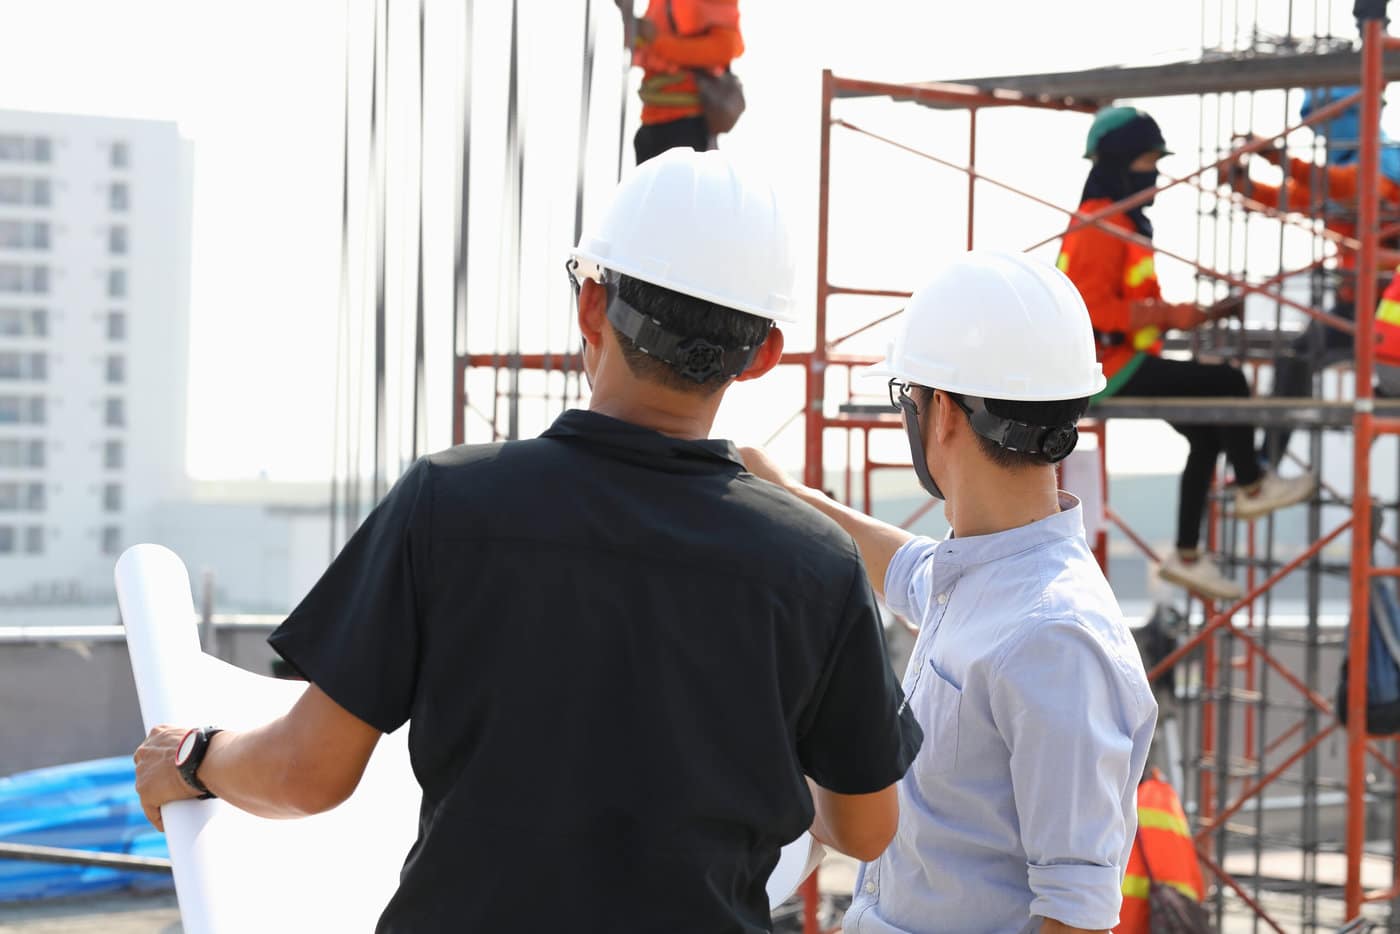 Two Engineers In Hard Hats, One Holding Blueprints, Observing Construction Workers On A Scaffold In An Urban Setting.